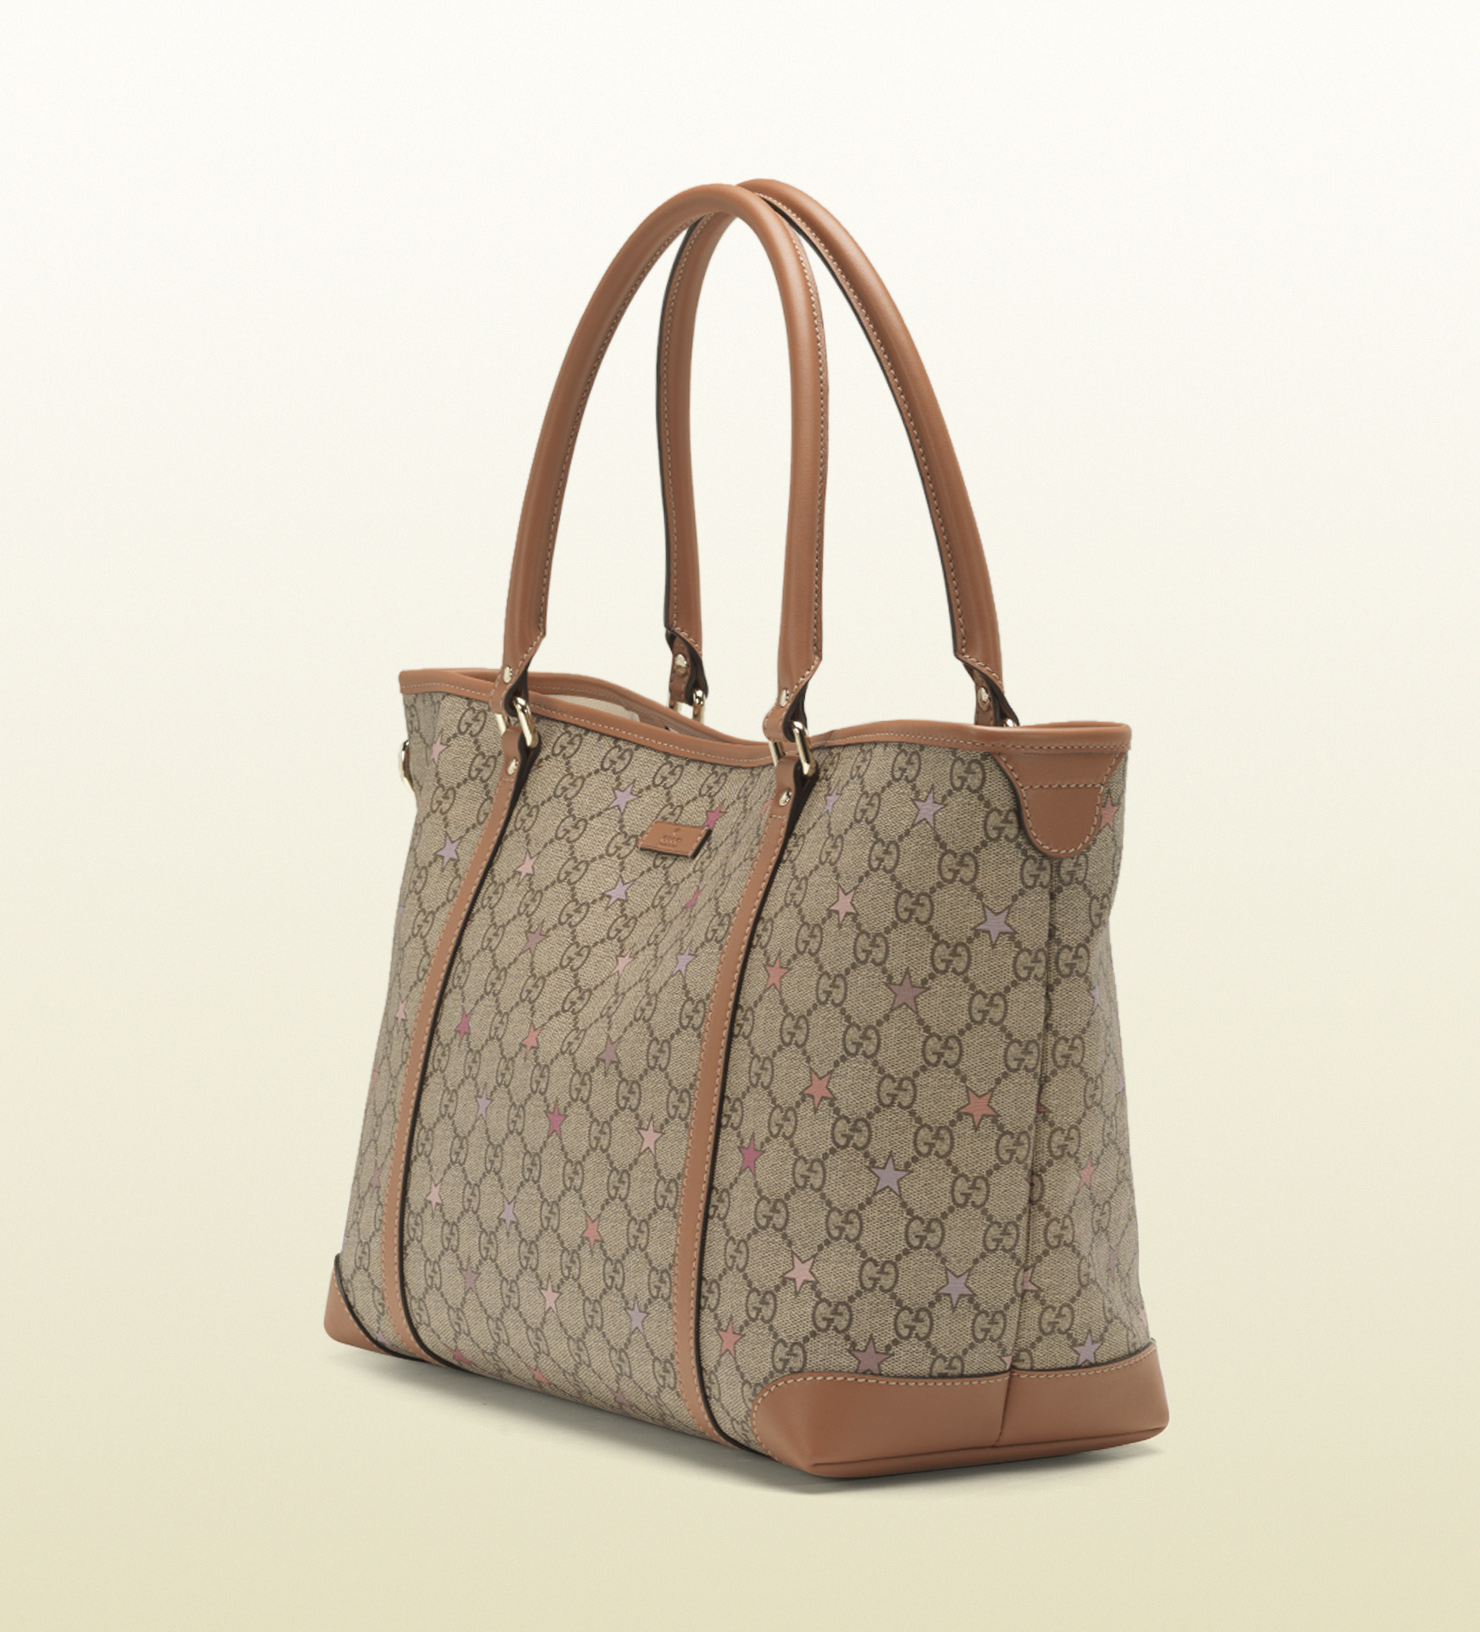 Lyst - Gucci Large Gg Supreme Canvas Tote with Pouch in Natural